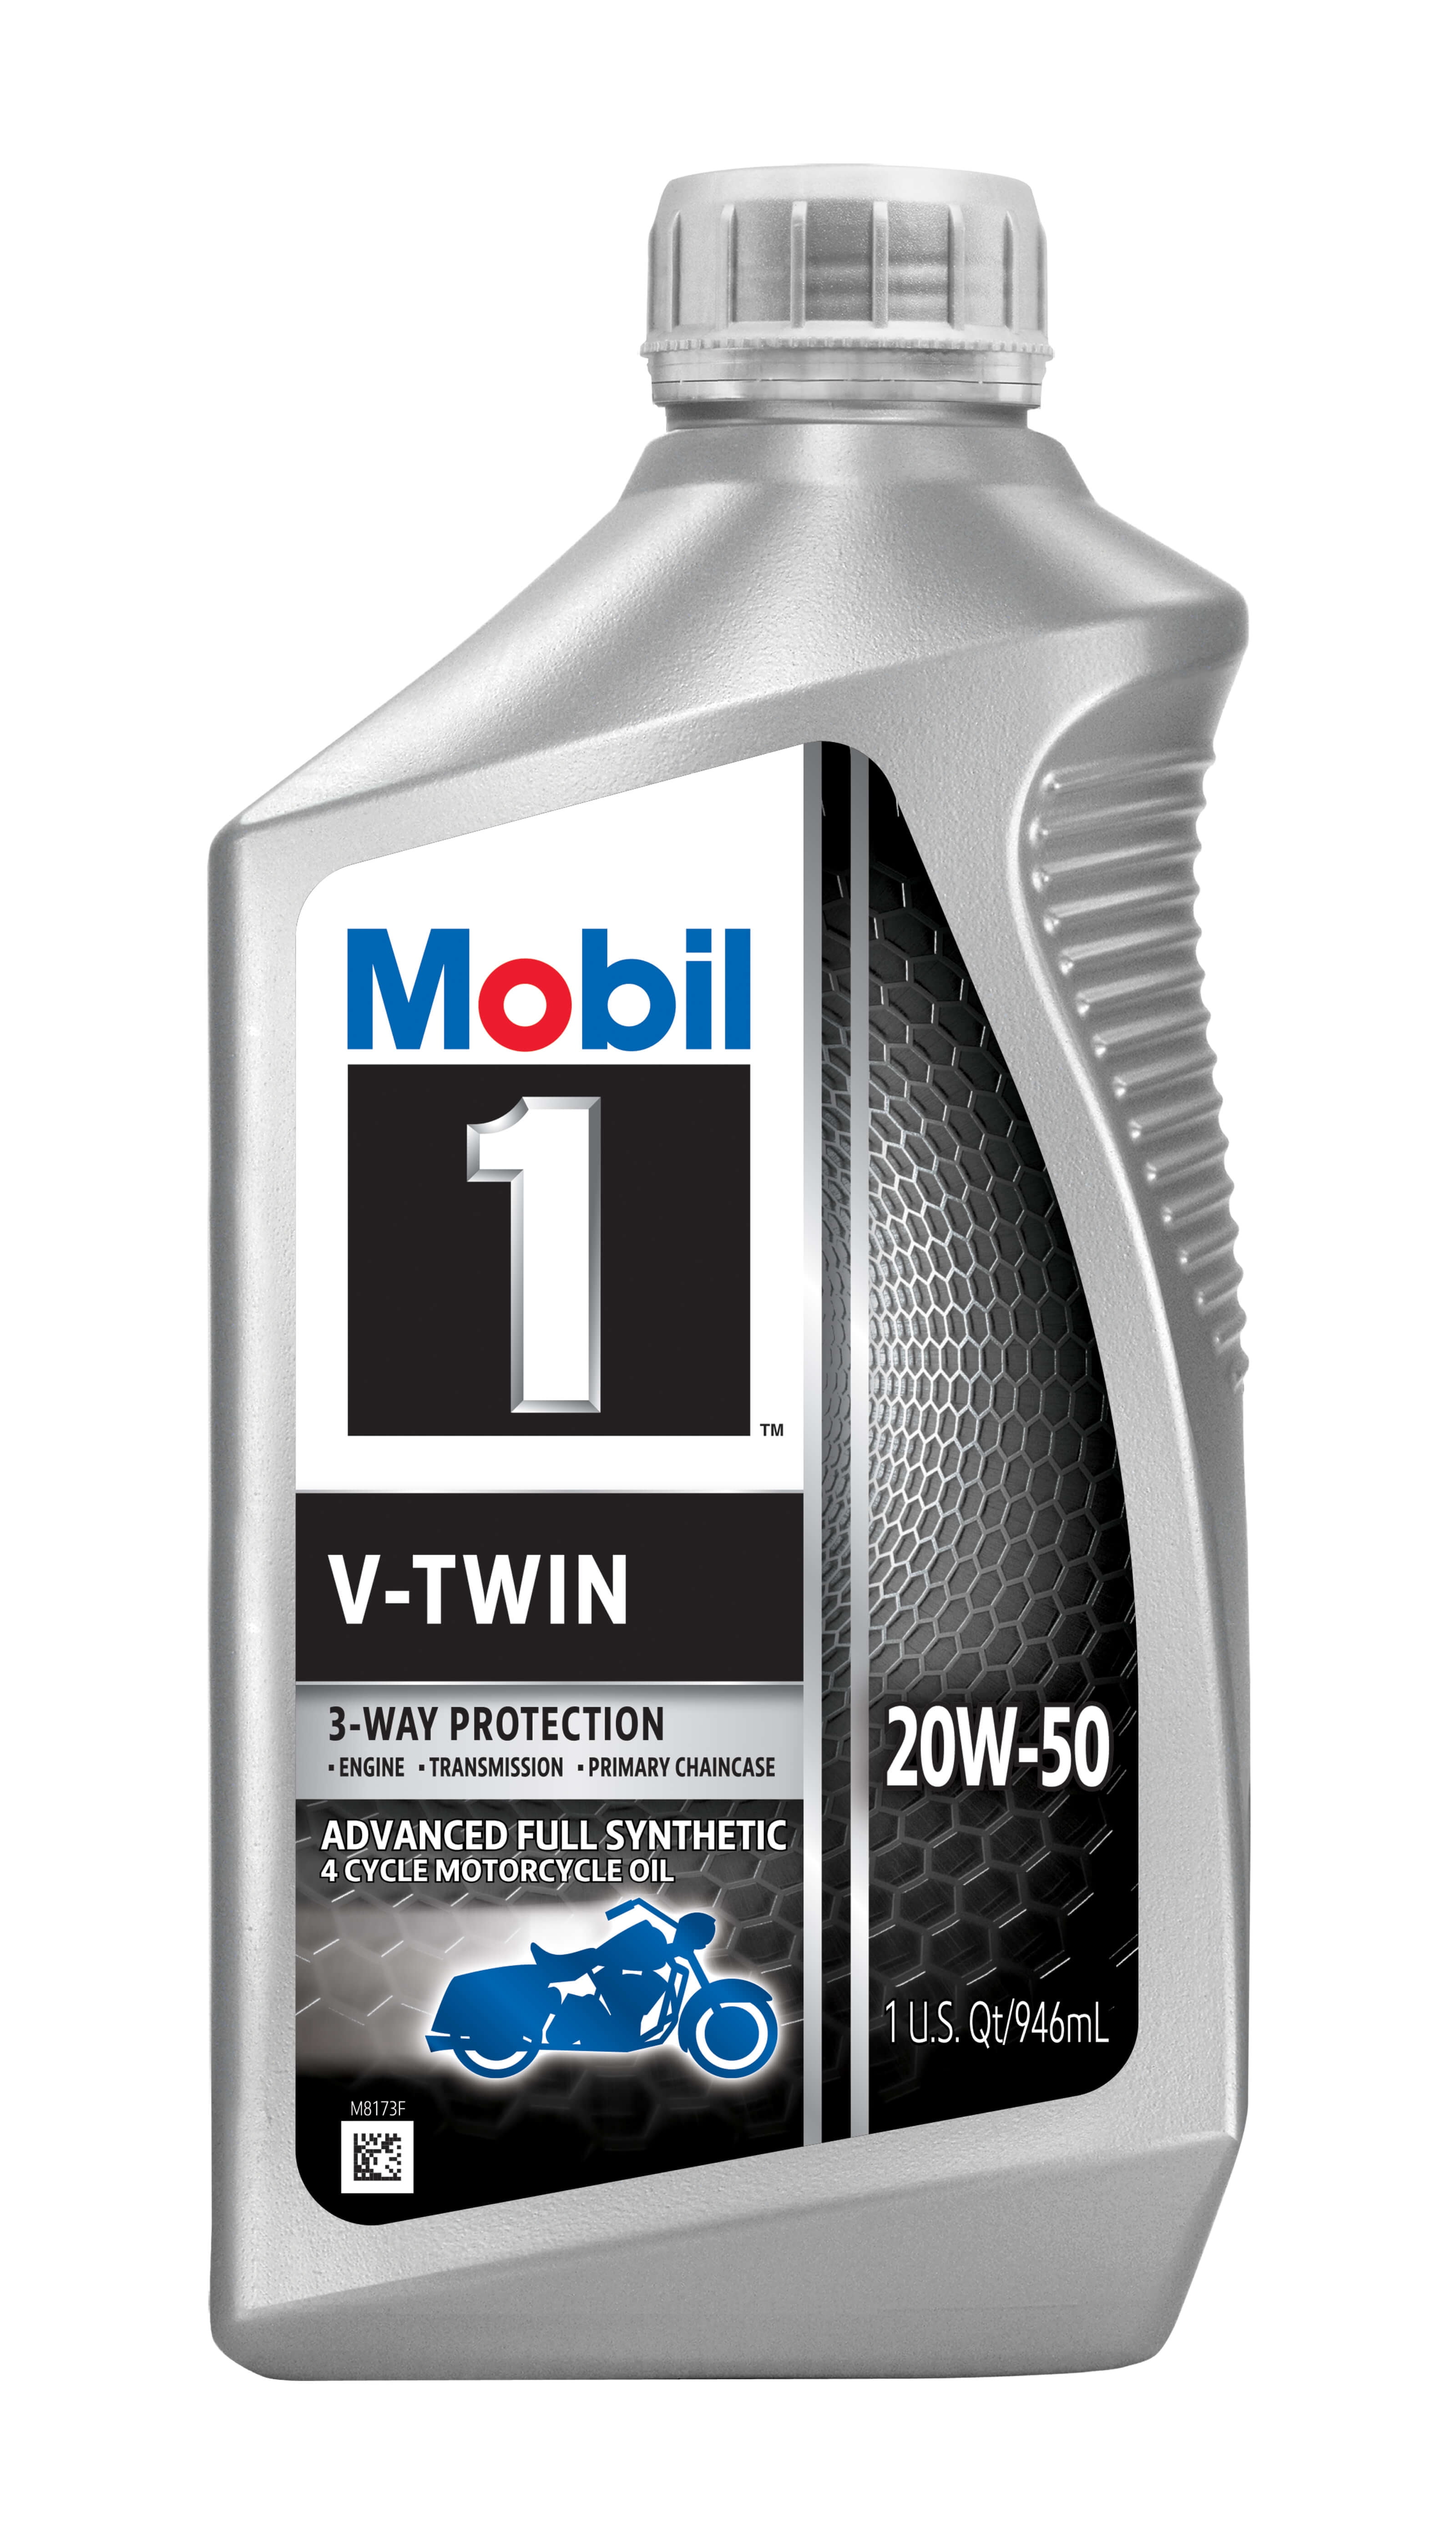 buy-mobil-1-v-twin-full-synthetic-motorcycle-oil-20w-50-1-qt-online-at